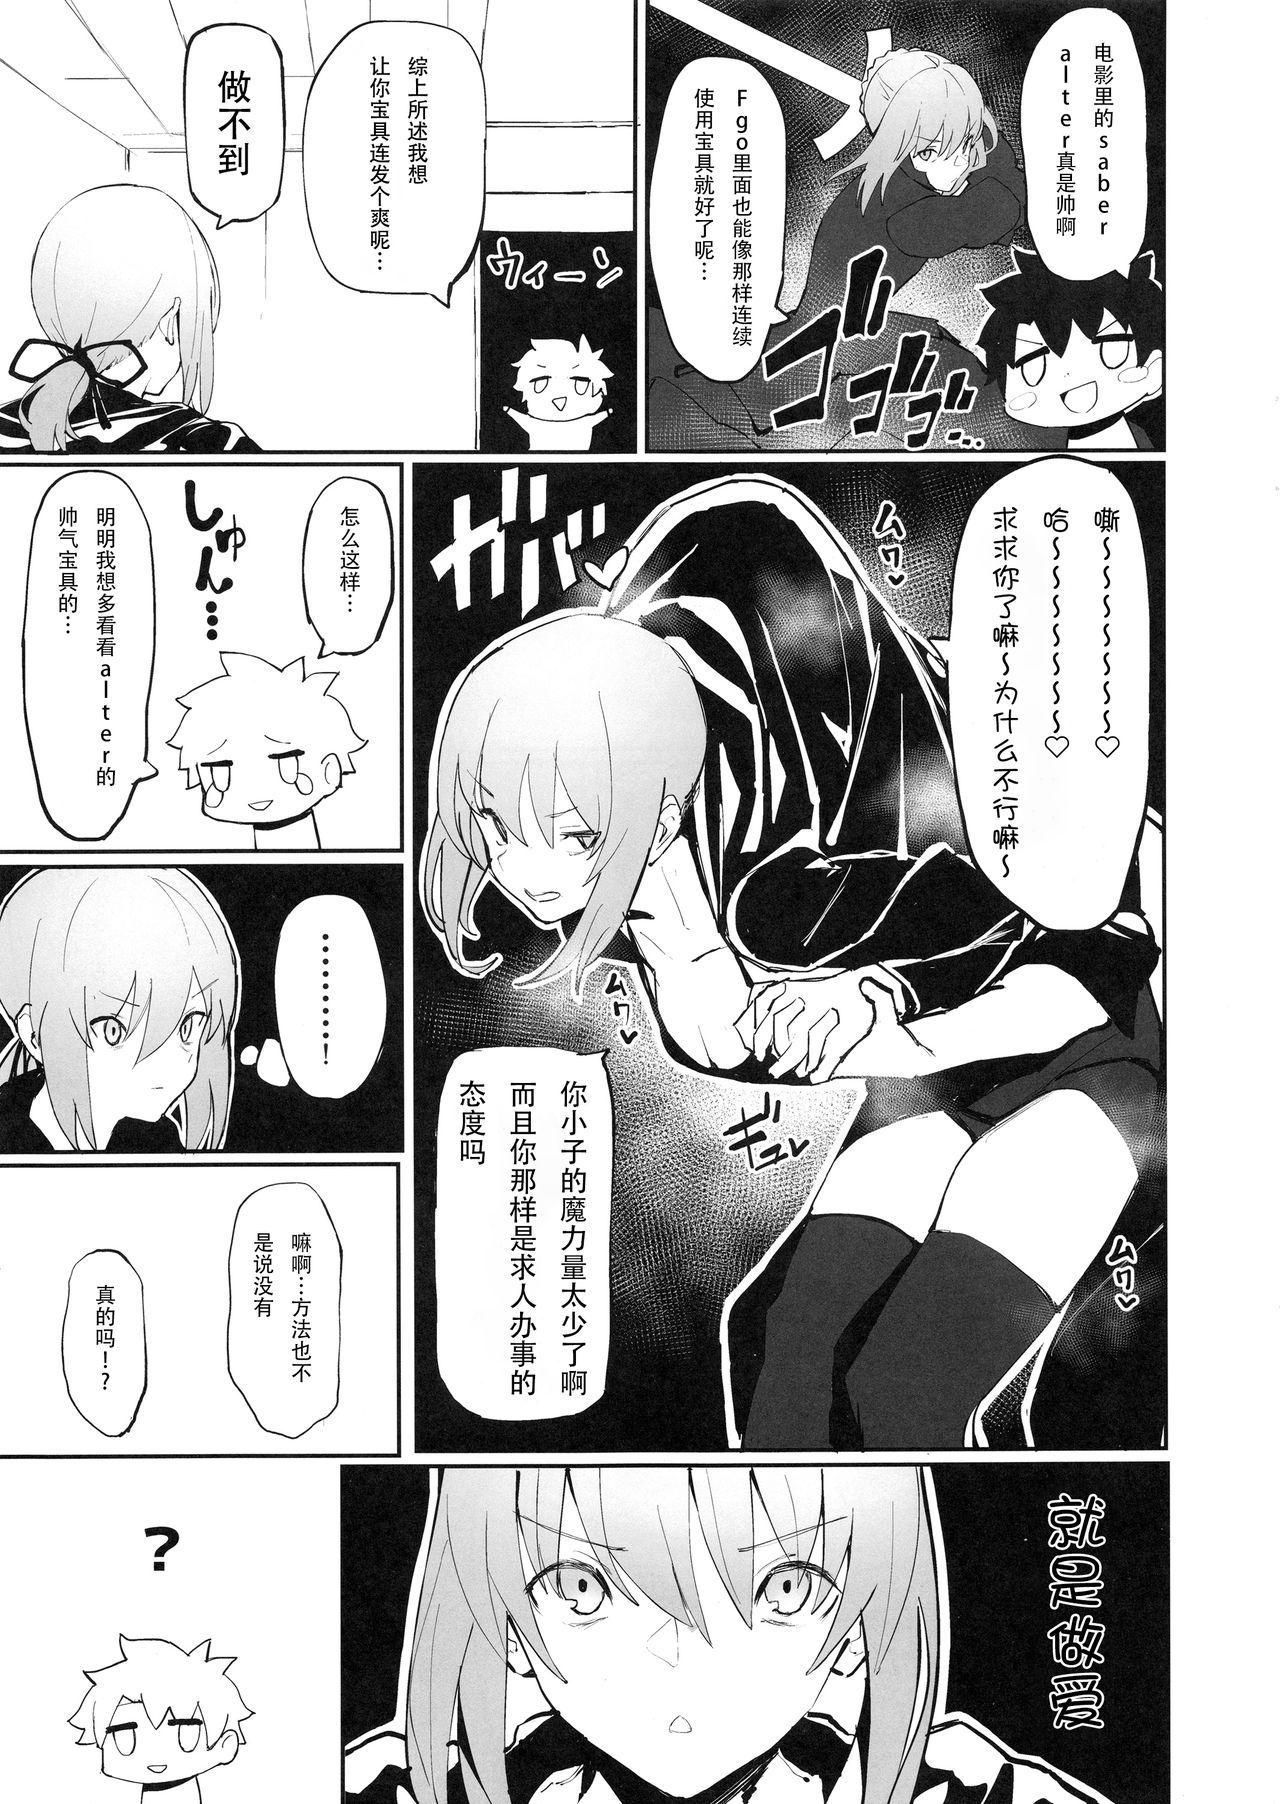 From Saber Alter to Maryoku Kyoukyuu | 和saber alter的魔力供给♡ - Fate grand order Metendo - Page 2